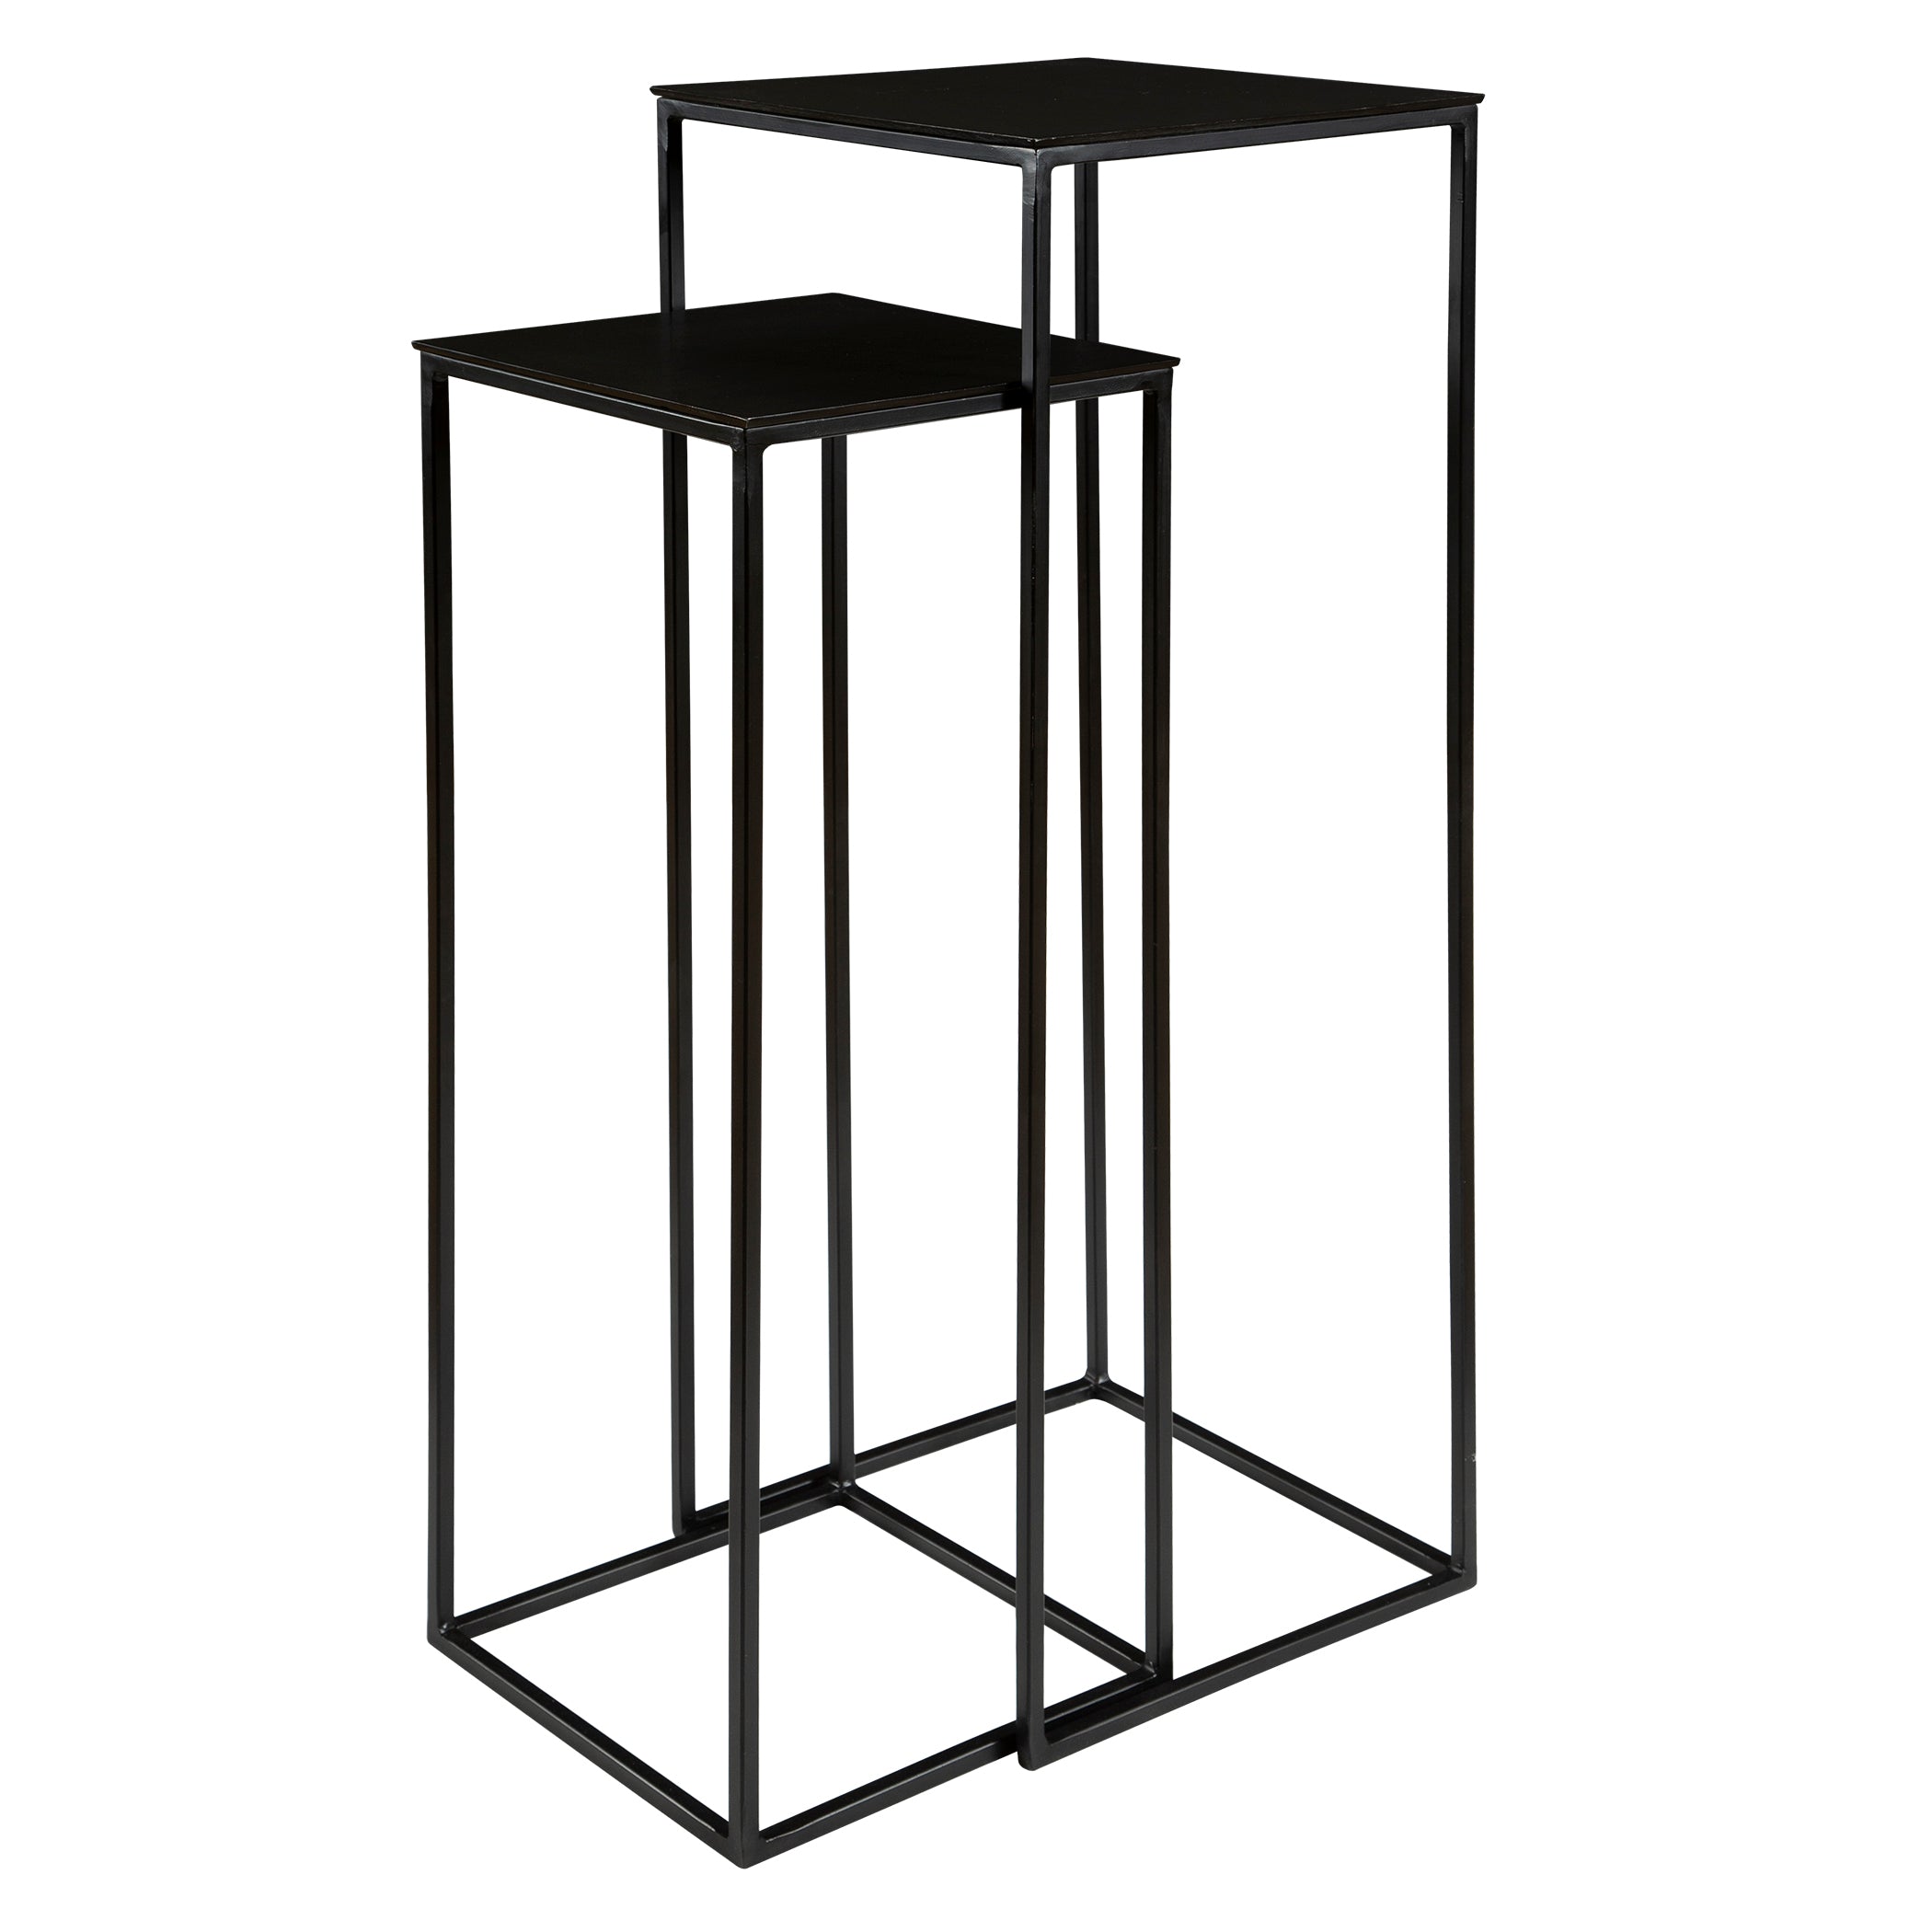 Uttermost Coreene Accent & End Tables Accent & End Tables Uttermost   